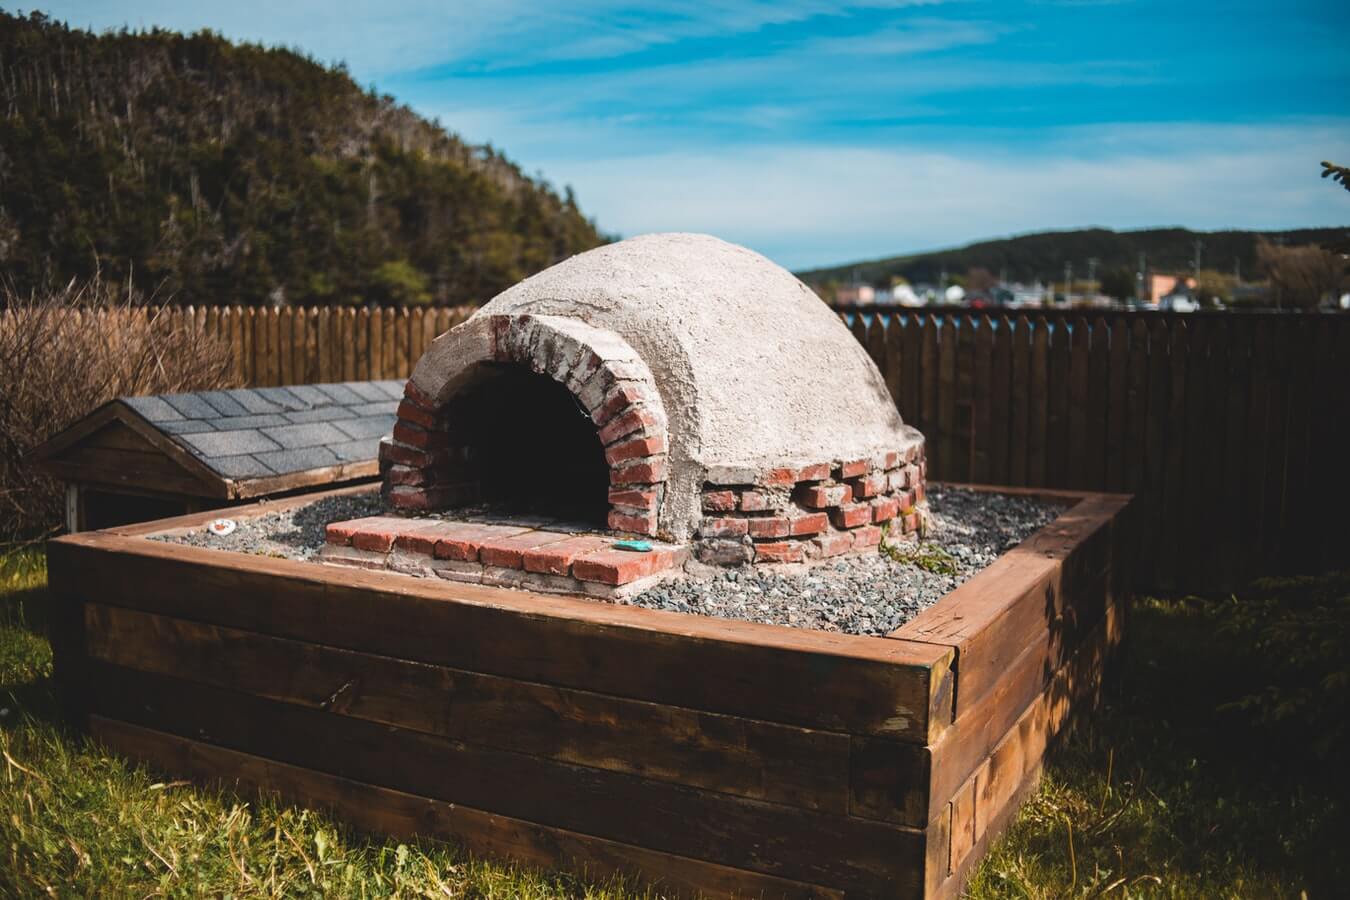 Diy Outdoor Pizza Oven How To Build, Building An Outdoor Pizza Brick Oven